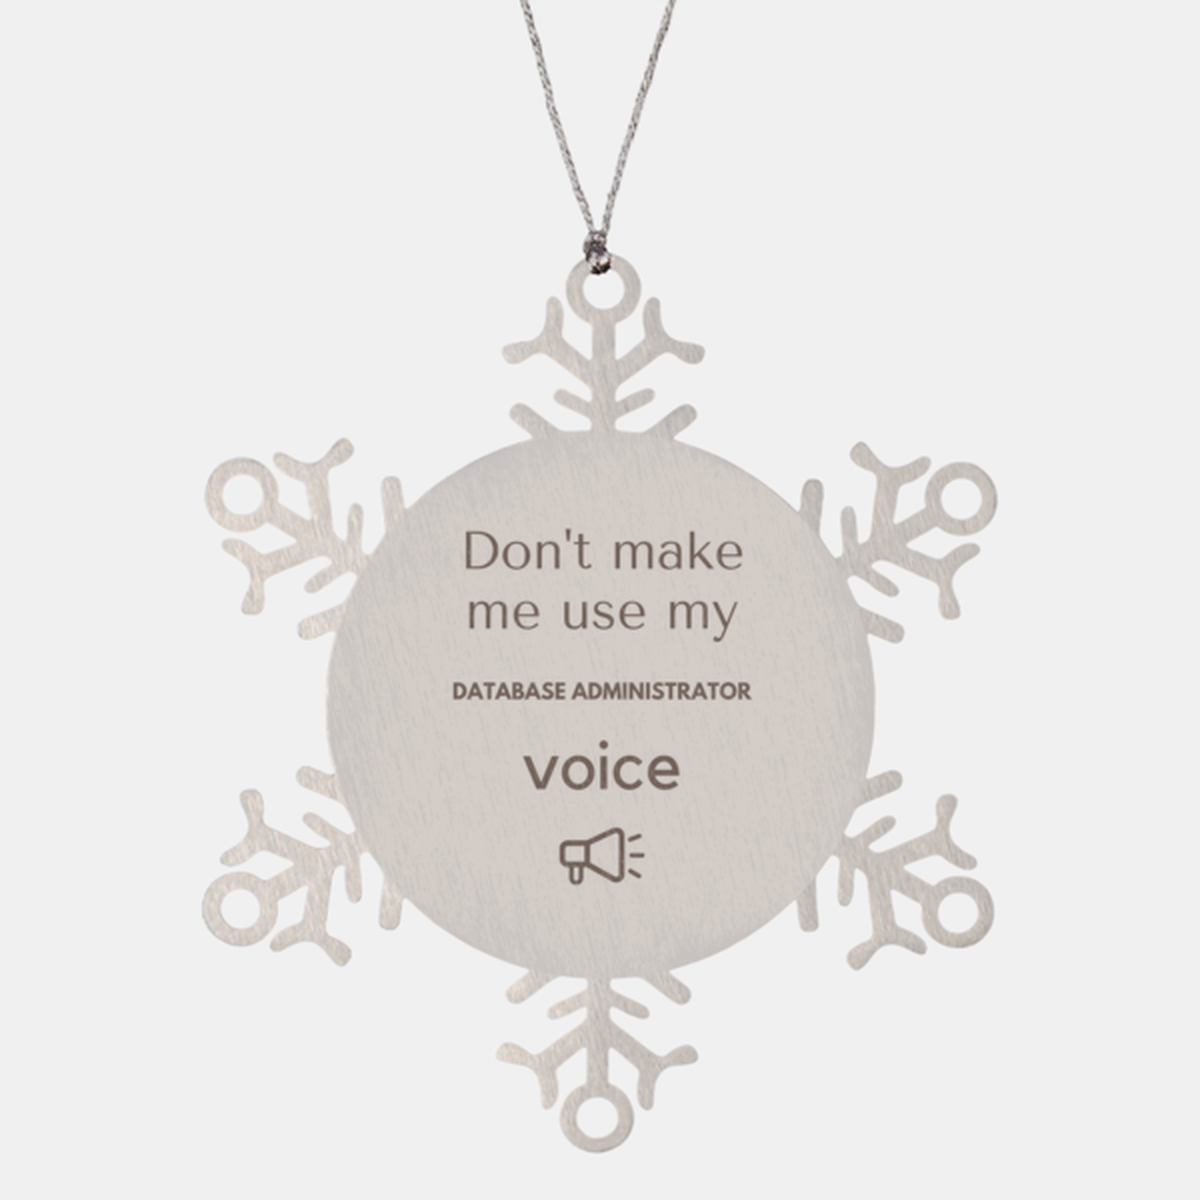 Don't make me use my Database Administrator voice, Sarcasm Database Administrator Ornament Gifts, Christmas Database Administrator Snowflake Ornament Unique Gifts For Database Administrator Coworkers, Men, Women, Colleague, Friends